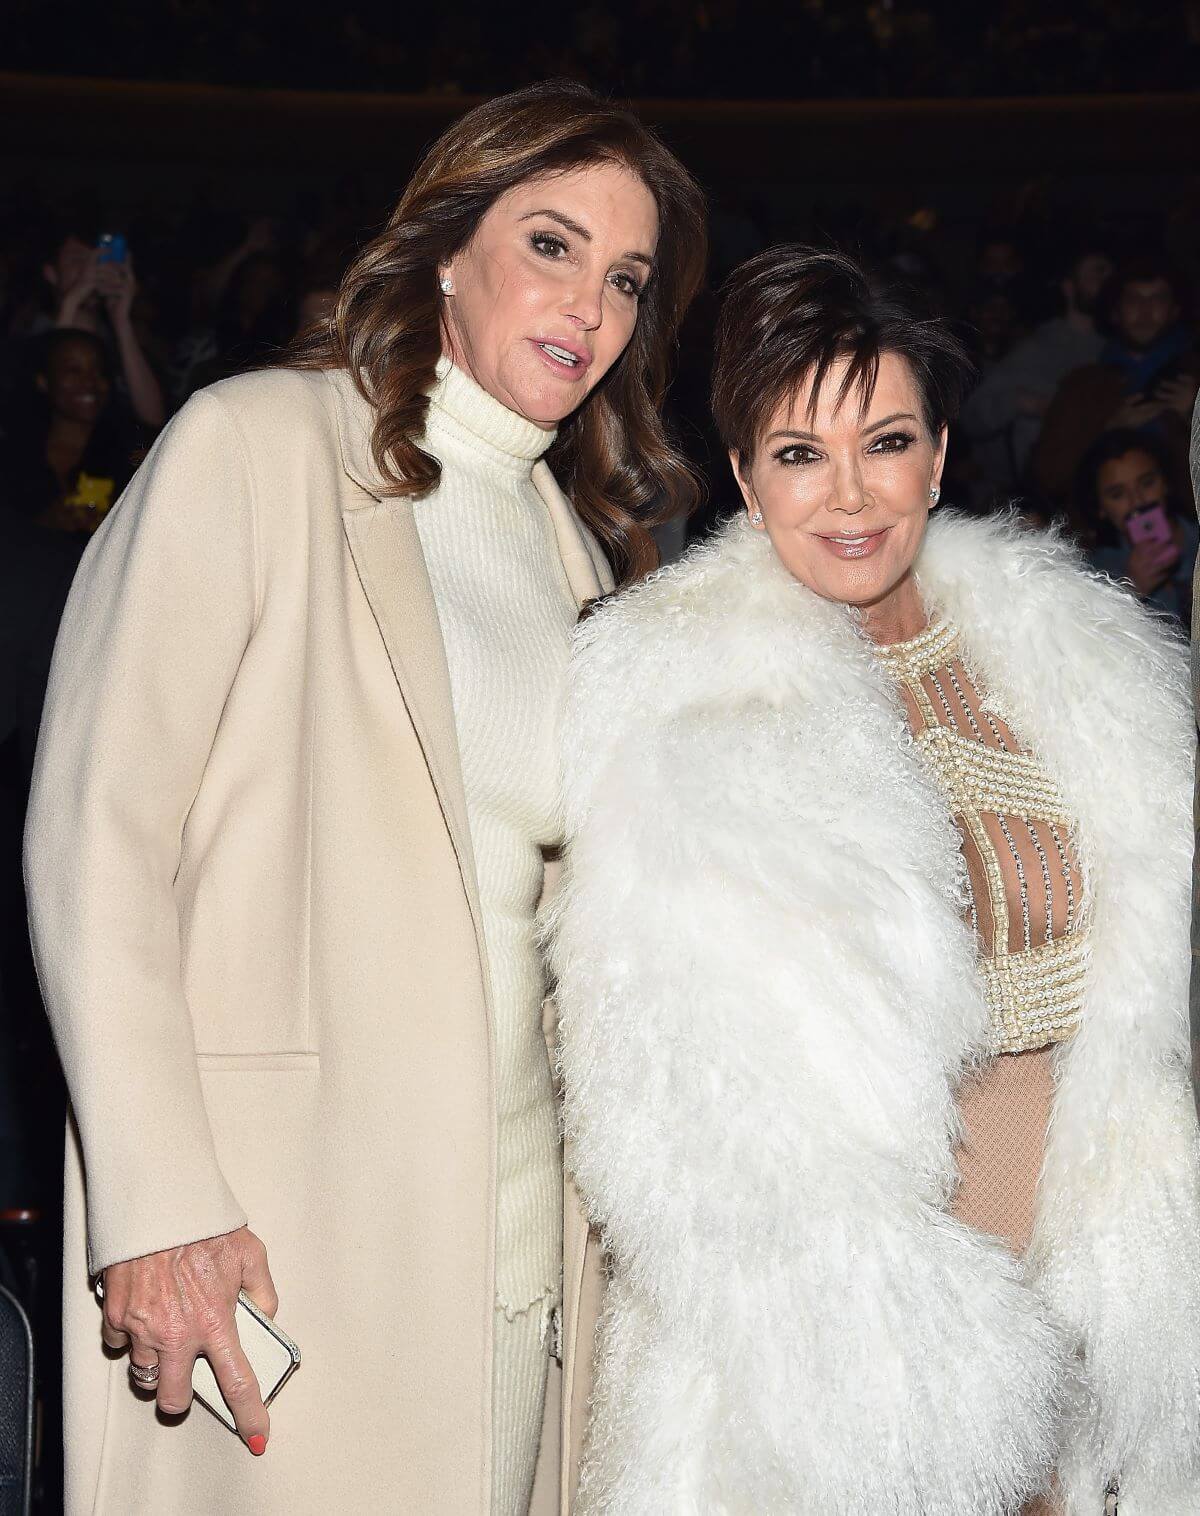 Caitlyn Jenner and Kris Jenner attend Kanye West Yeezy Season 3